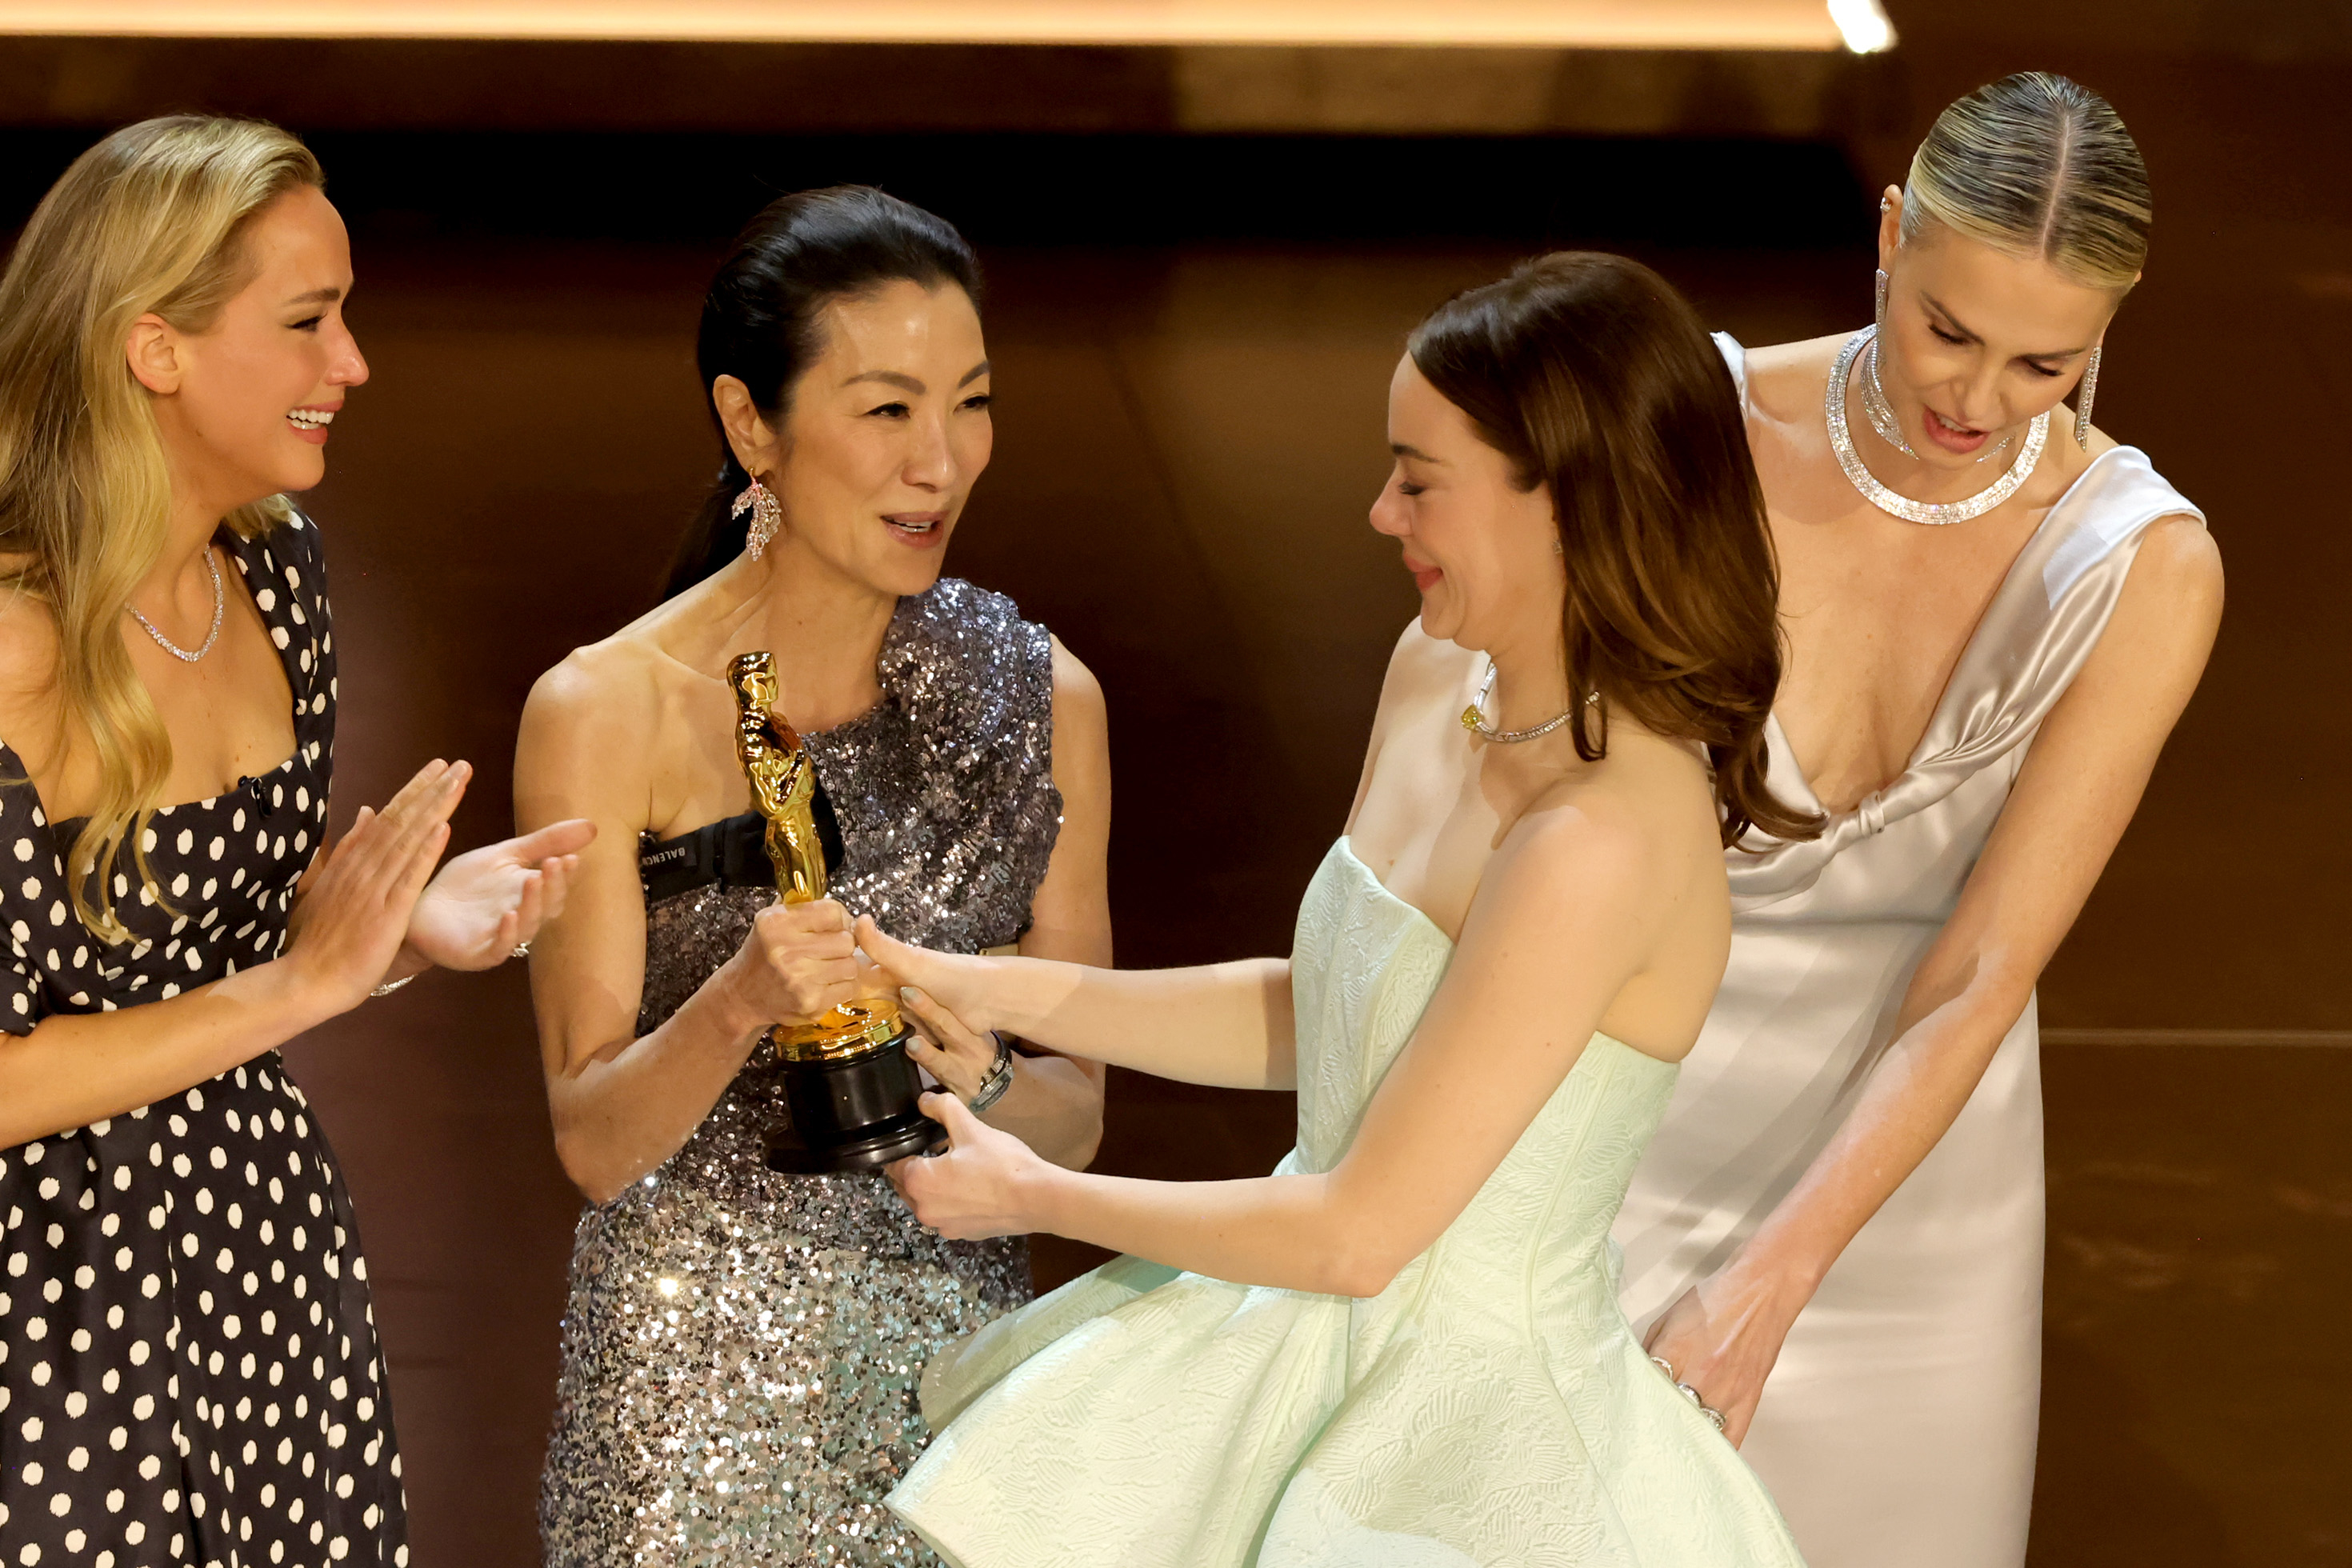 Emma with past winners, including Jennifer Lawrence and Michelle Yeoh, holding a trophy, all smiling and interacting joyfully